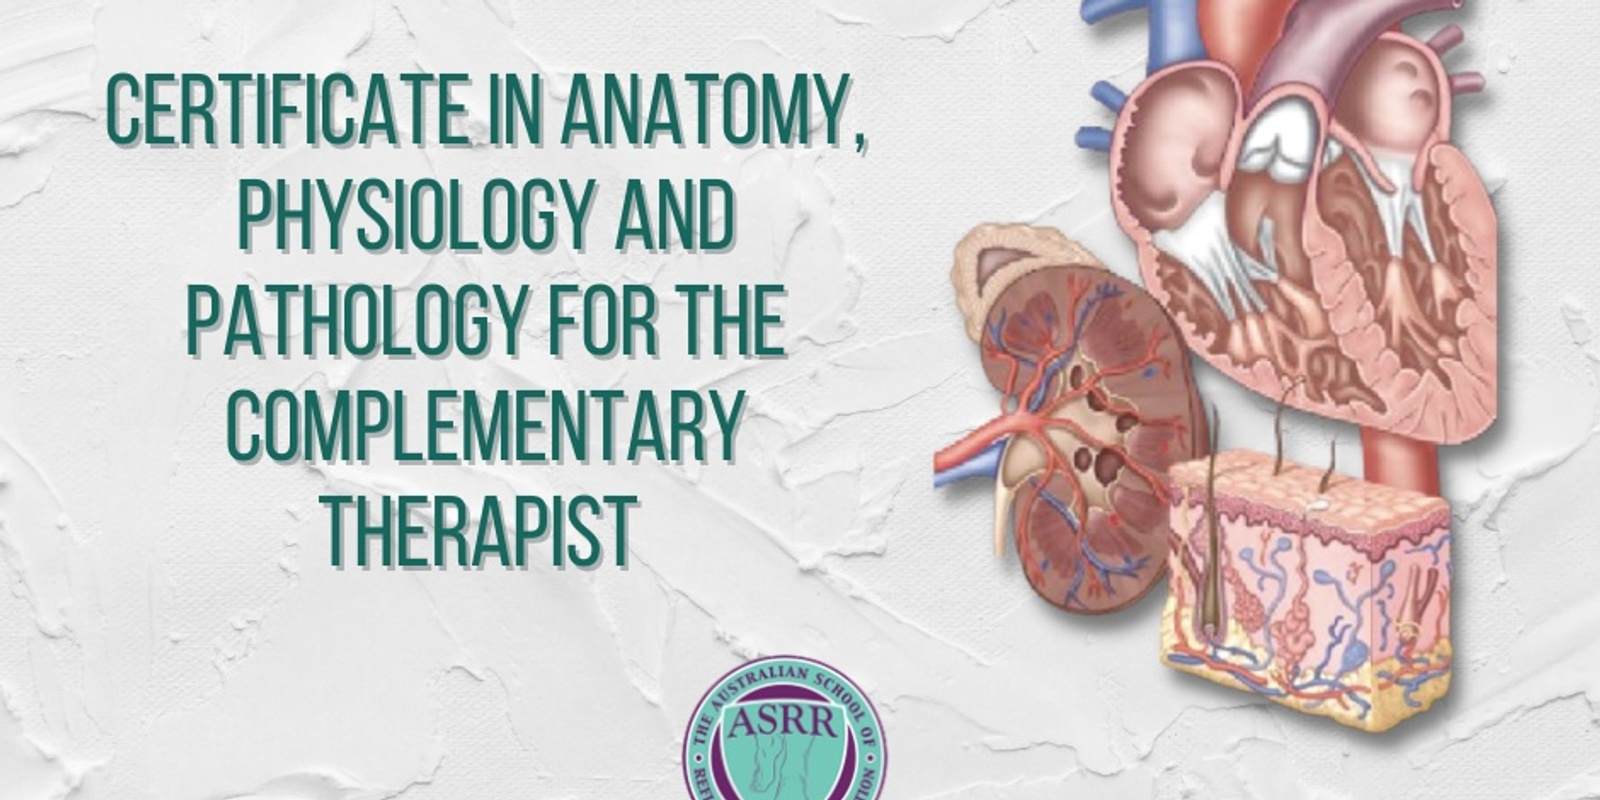 Anatomy diploma for any health professional or just for fun to gain further understanding.